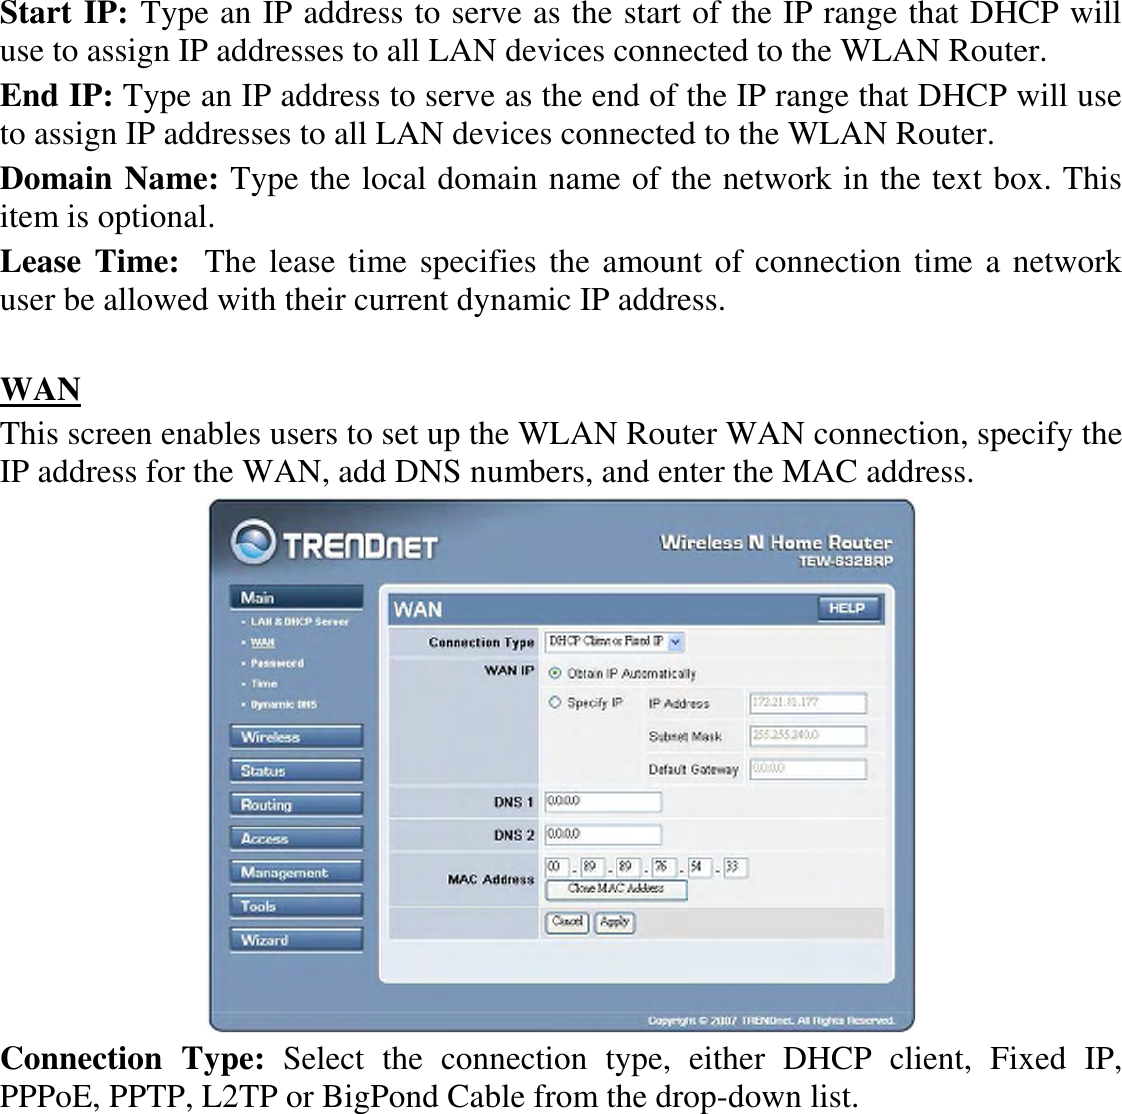 Start IP: Type an IP address to serve as the start of the IP range that DHCP will use to assign IP addresses to all LAN devices connected to the WLAN Router. End IP: Type an IP address to serve as the end of the IP range that DHCP will use to assign IP addresses to all LAN devices connected to the WLAN Router. Domain Name: Type the local domain name of the network in the text box. This item is optional. Lease Time:  The lease time specifies the amount of connection time a network user be allowed with their current dynamic IP address.  WAN This screen enables users to set up the WLAN Router WAN connection, specify the IP address for the WAN, add DNS numbers, and enter the MAC address.  Connection  Type:  Select  the  connection  type,  either  DHCP  client,  Fixed  IP, PPPoE, PPTP, L2TP or BigPond Cable from the drop-down list. 